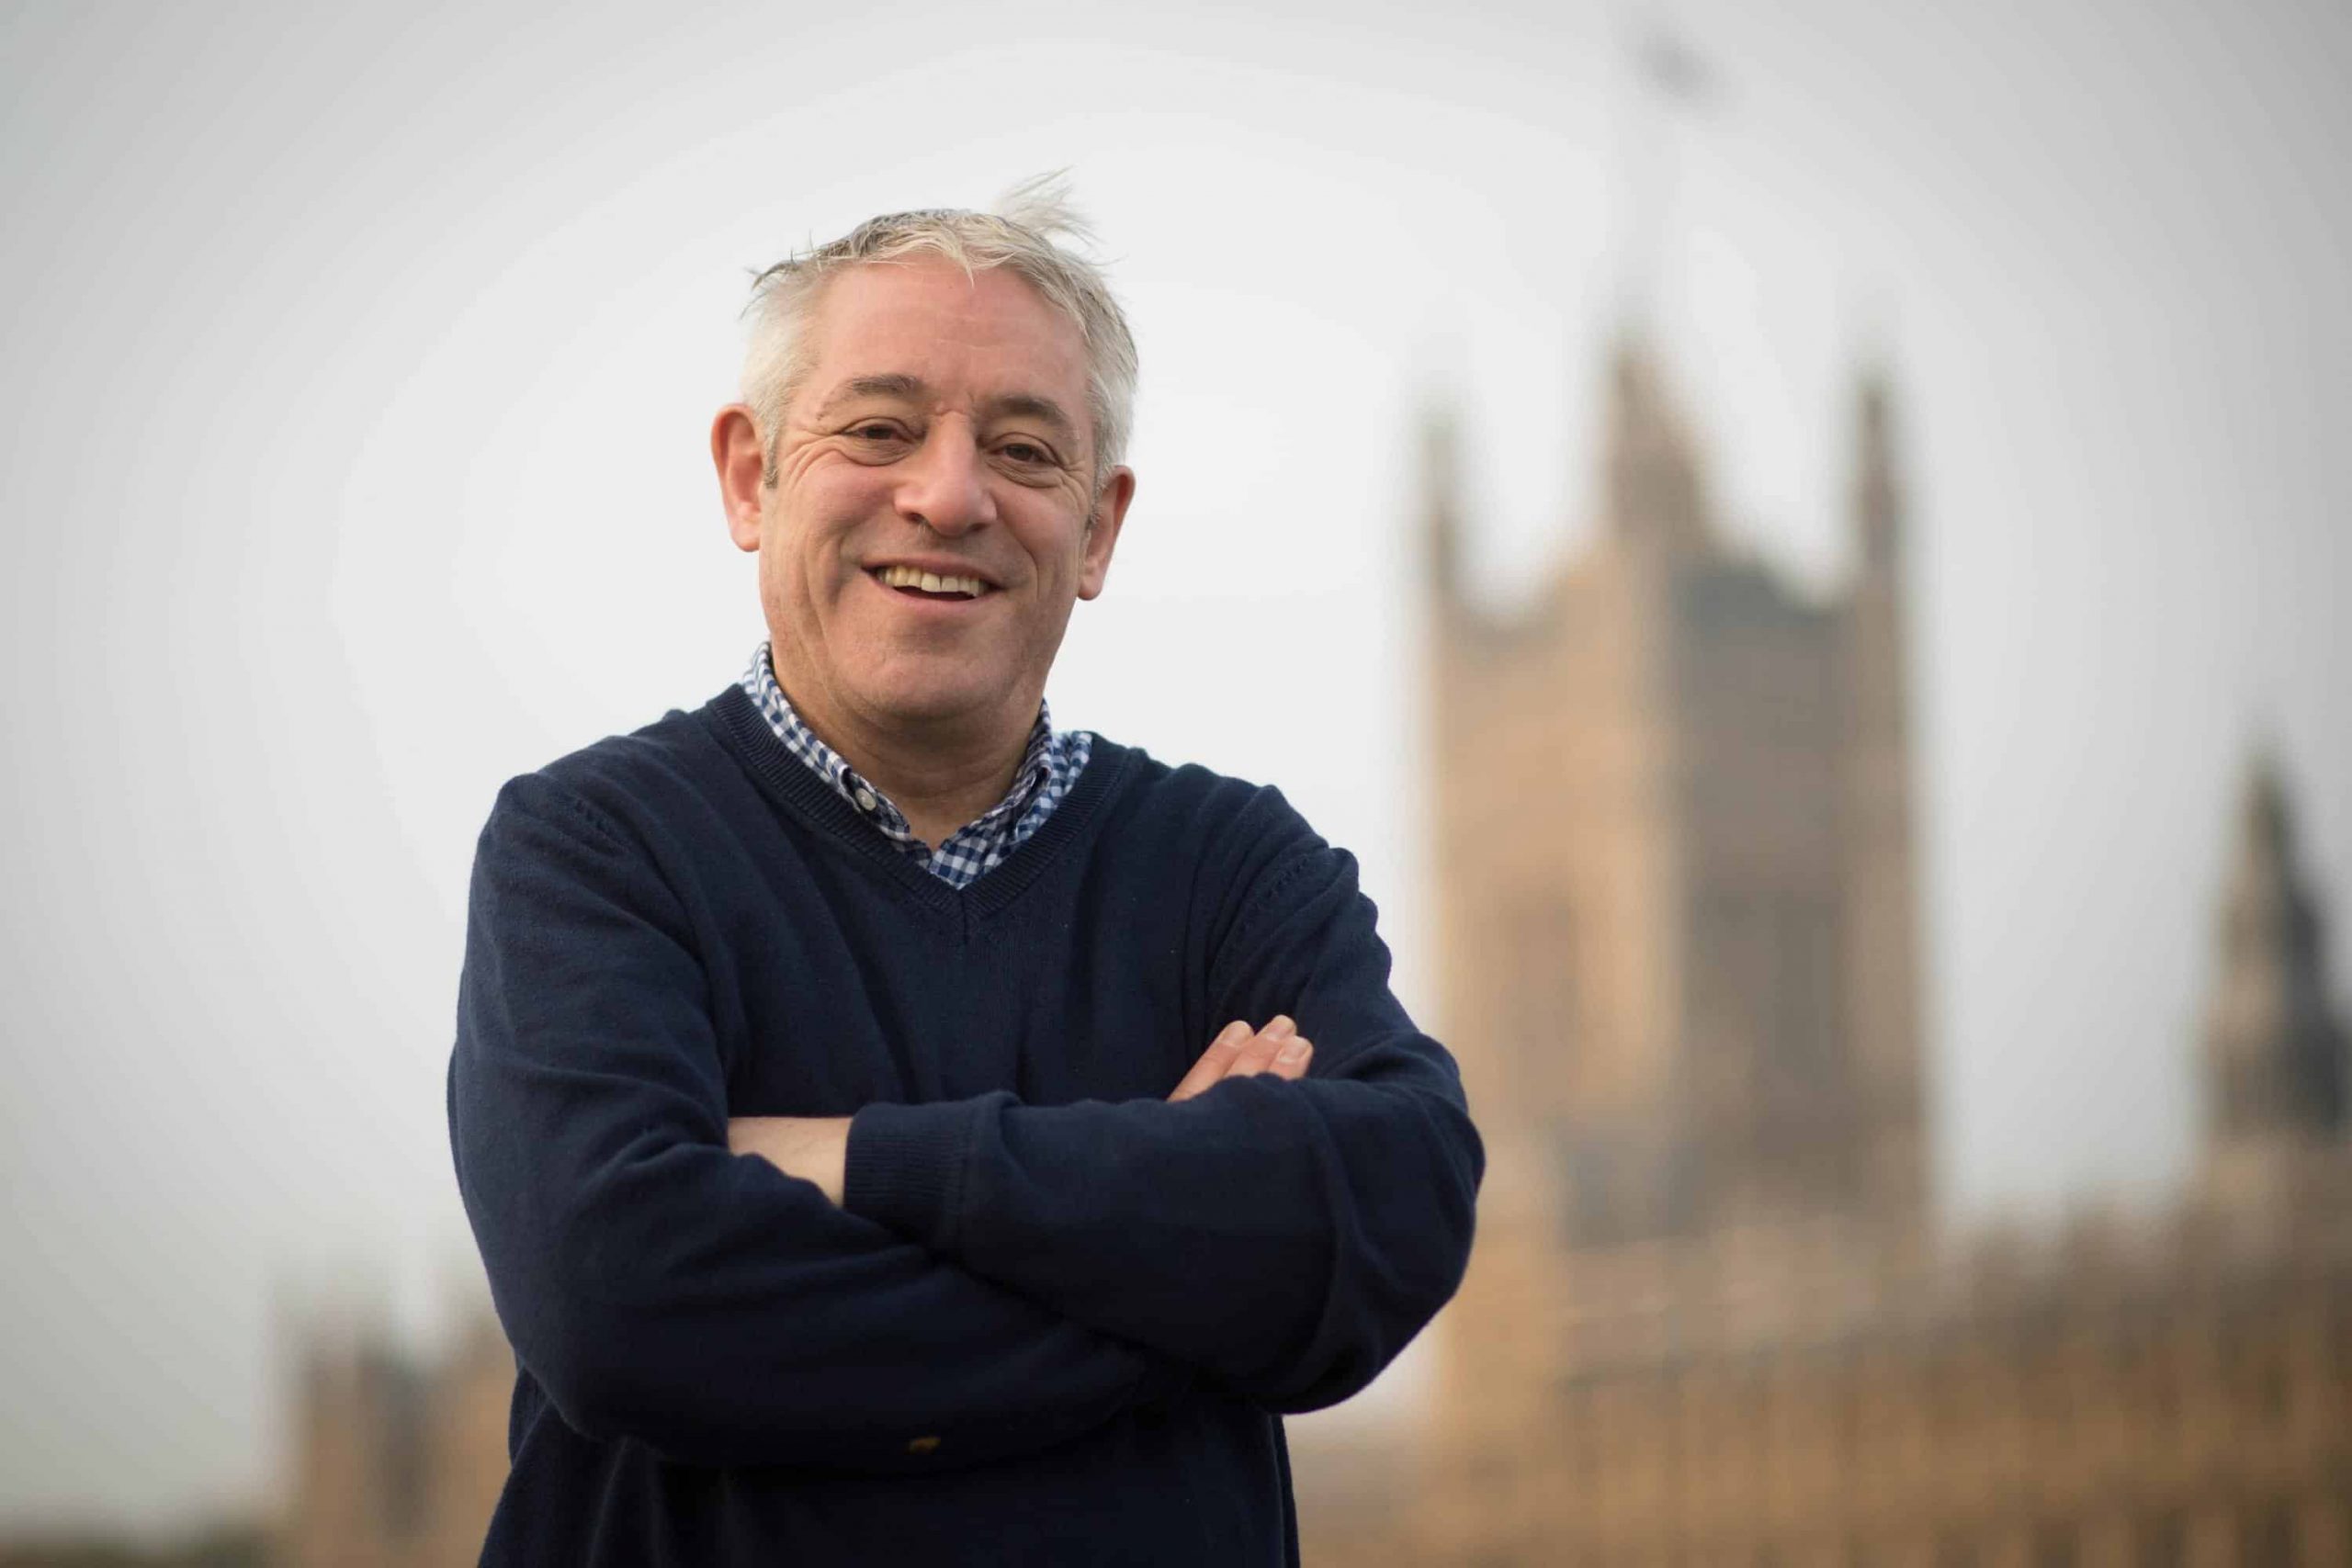 Former Black Rod submits bullying complaint against John Bercow